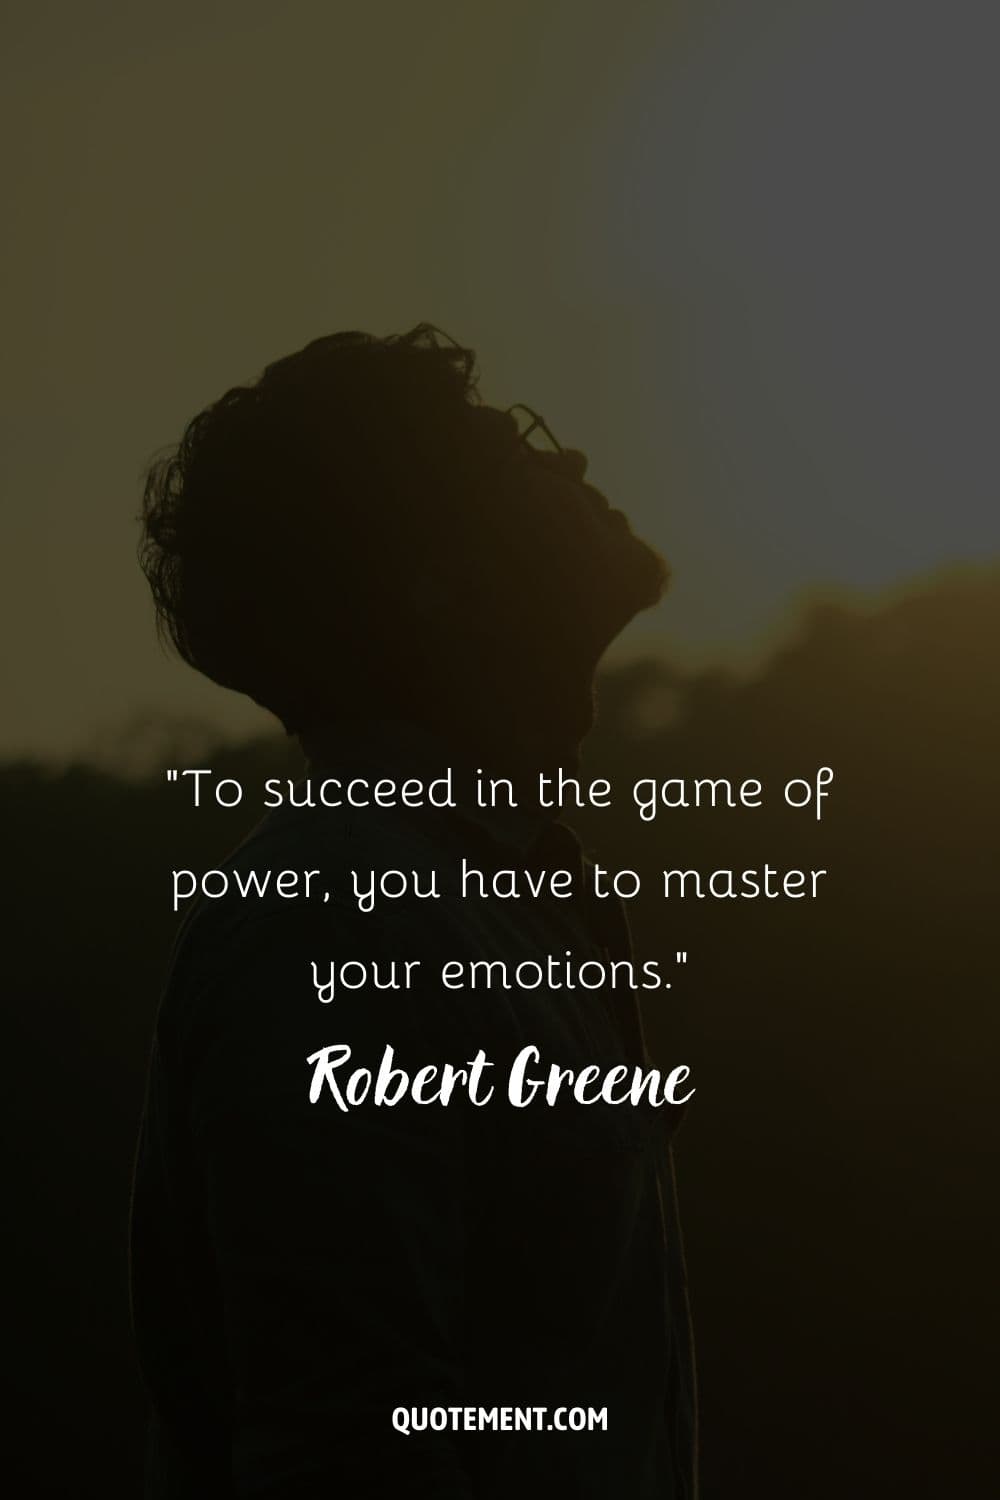 “To succeed in the game of power, you have to master your emotions.” ― Robert Greene, The 48 Laws of Power